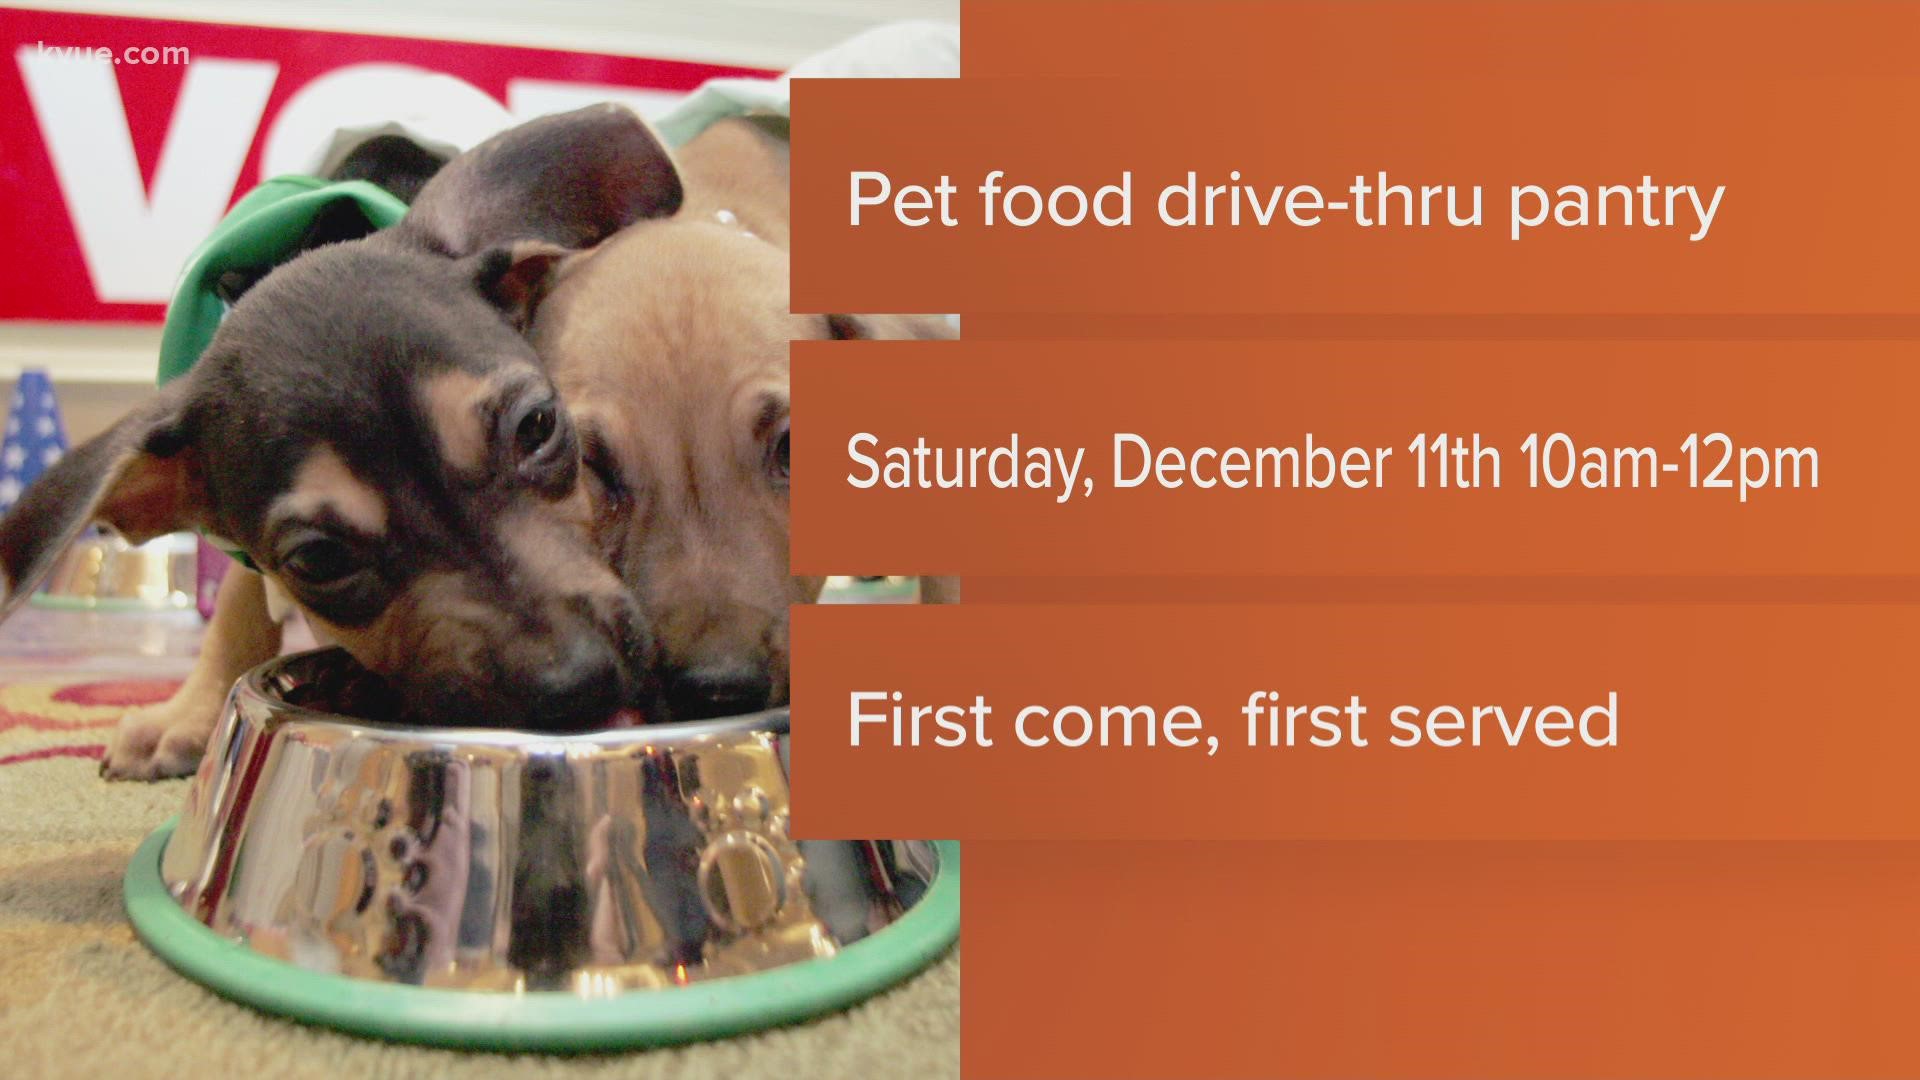 The Austin Humane Society is giving out thousands of pounds of pet food on Saturday, Dec. 11, from 9 a.m. until noon.